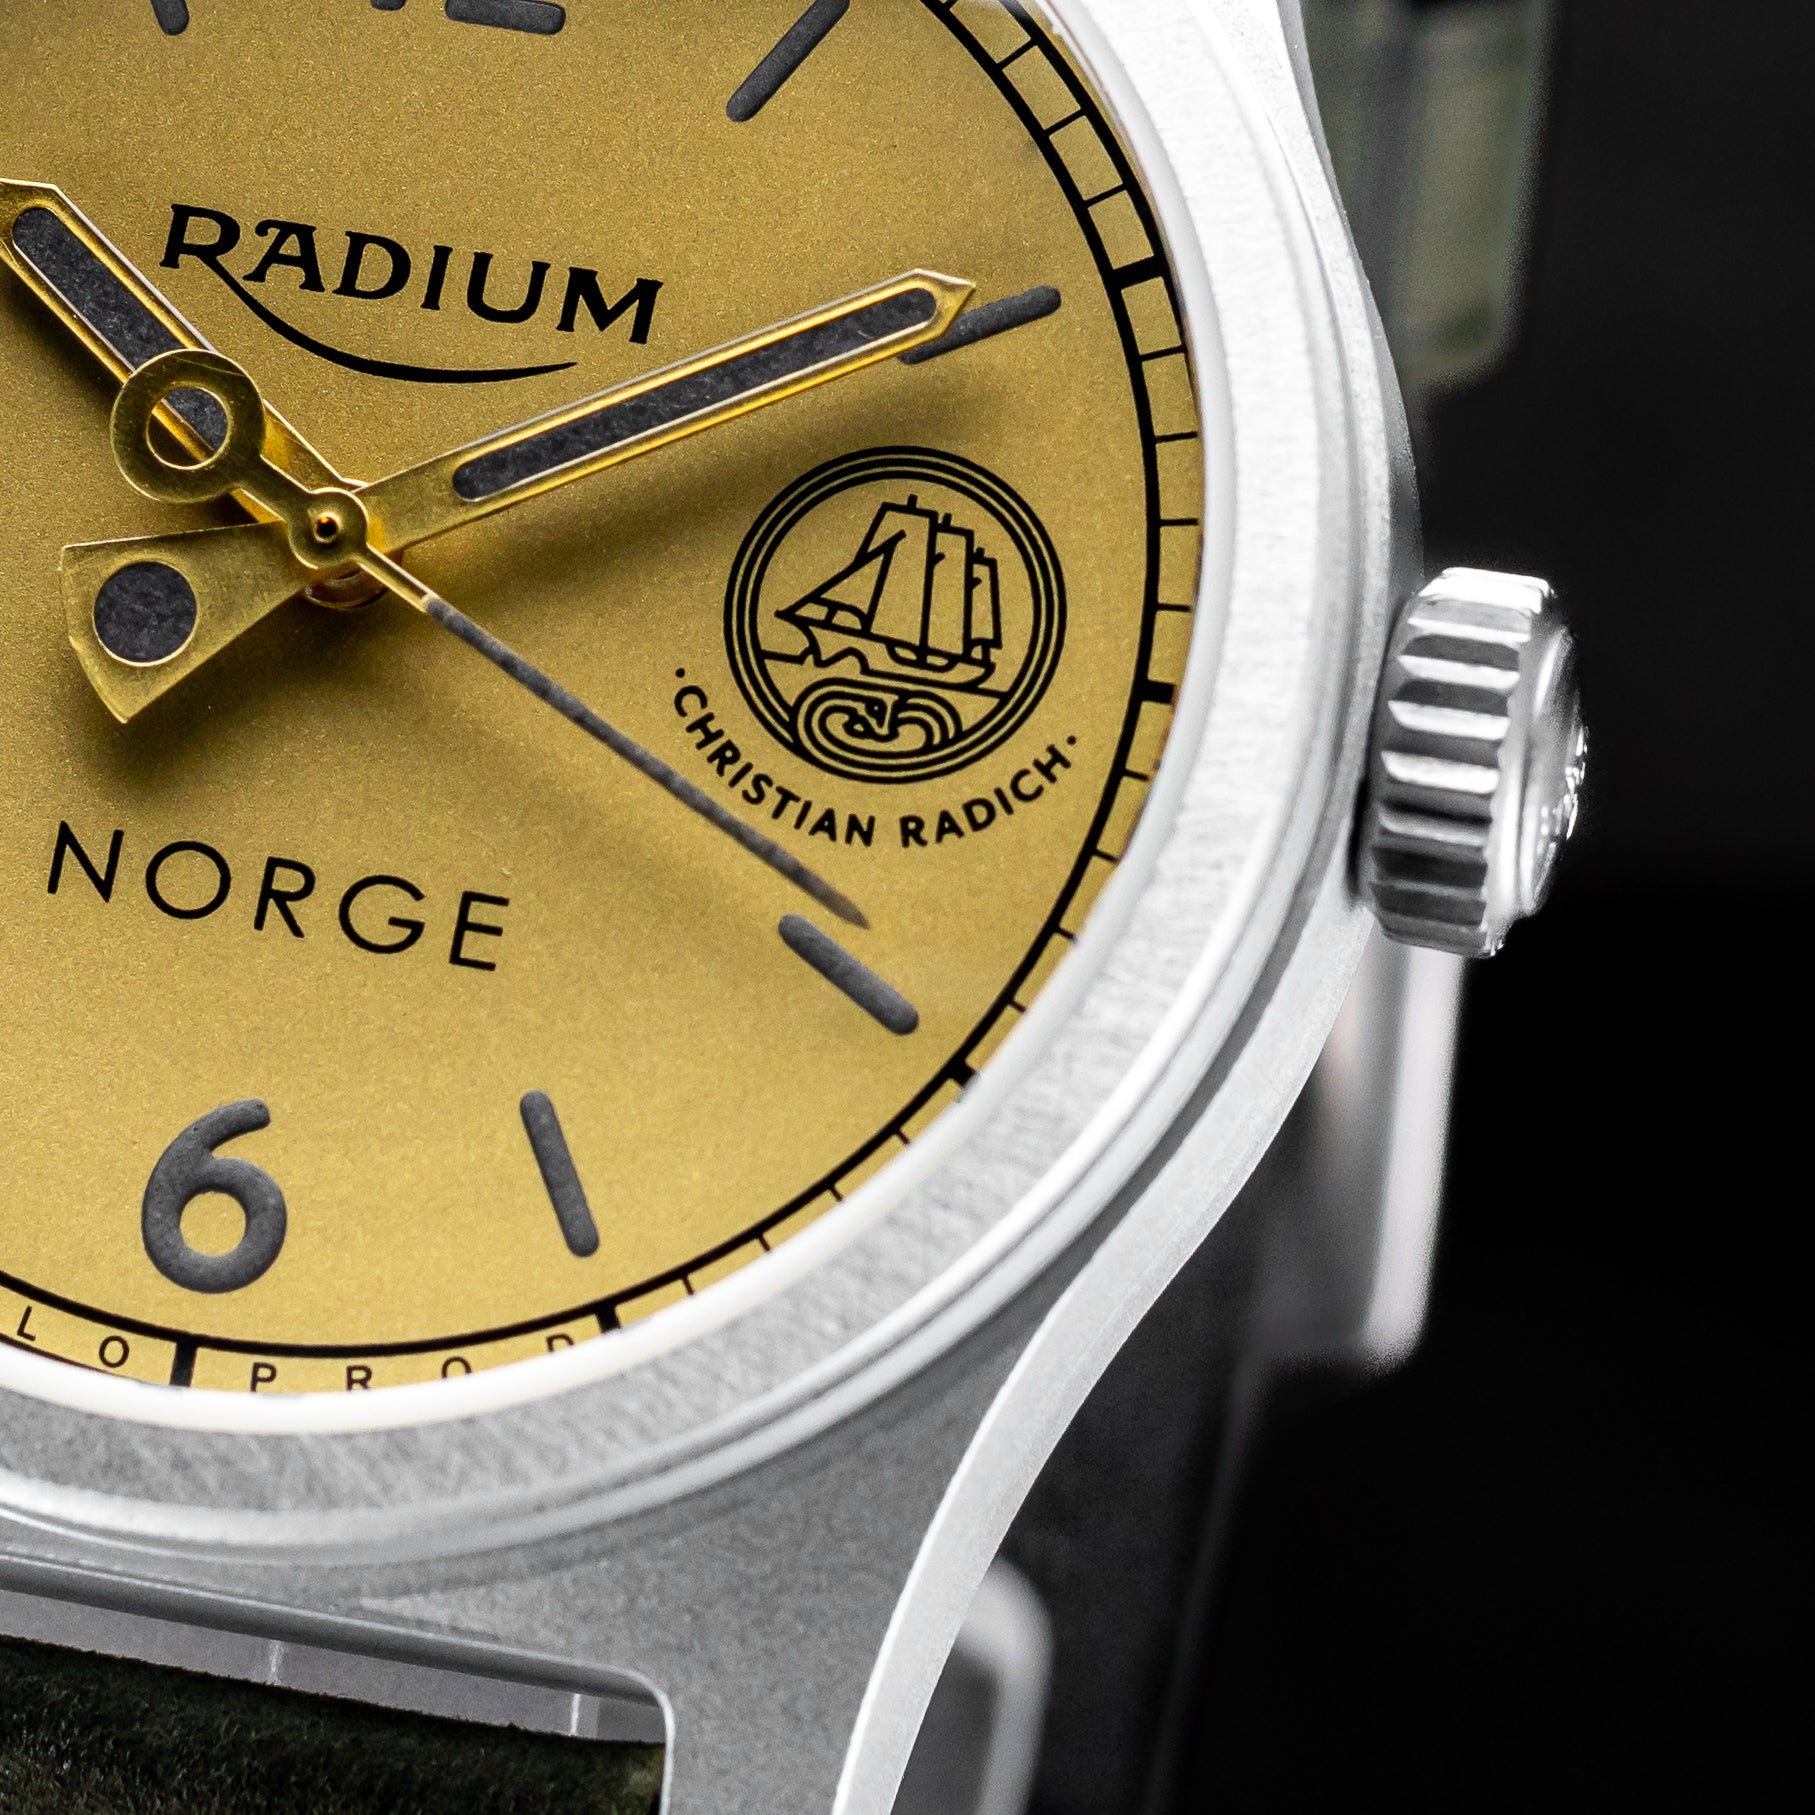 .38 Radium x Christian Radich: A Maritime Legacy, Crafted for the Modern Age